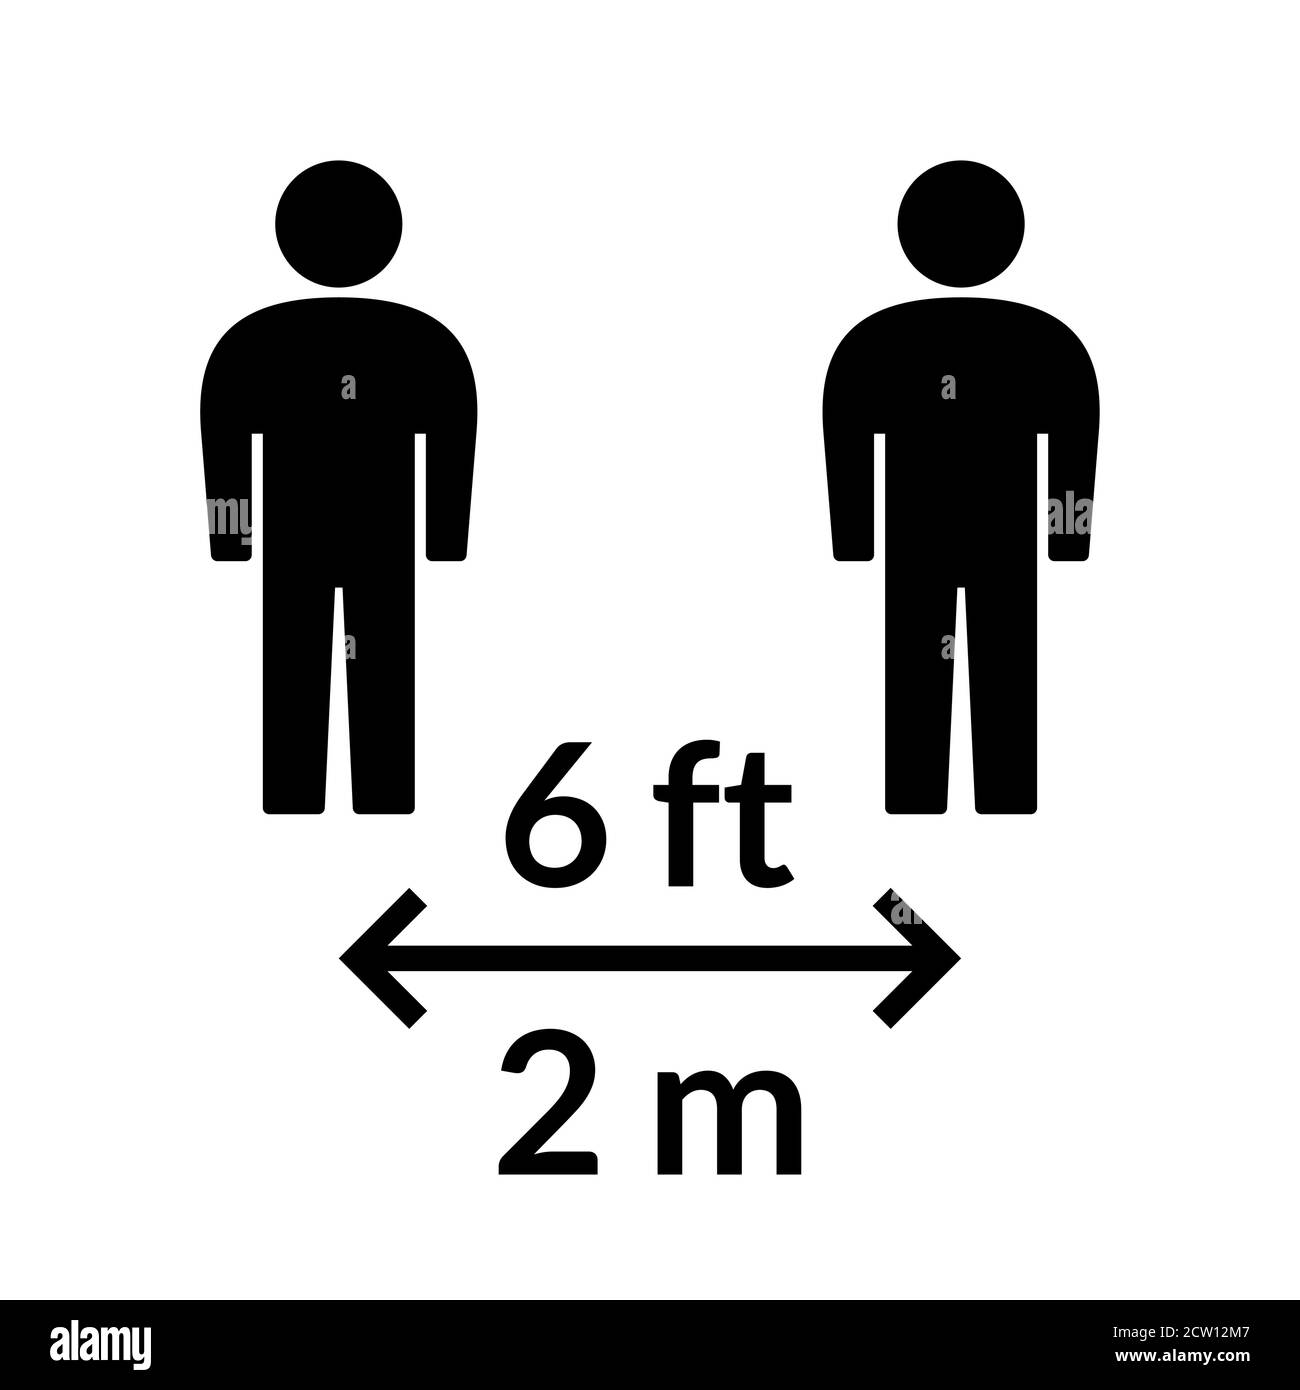 Social Distancing Keep Your Distance or Maintain a Distance of 6 ft / 6 Feet or 2 m / 2 Metres Icon. Vector Image. Stock Vector